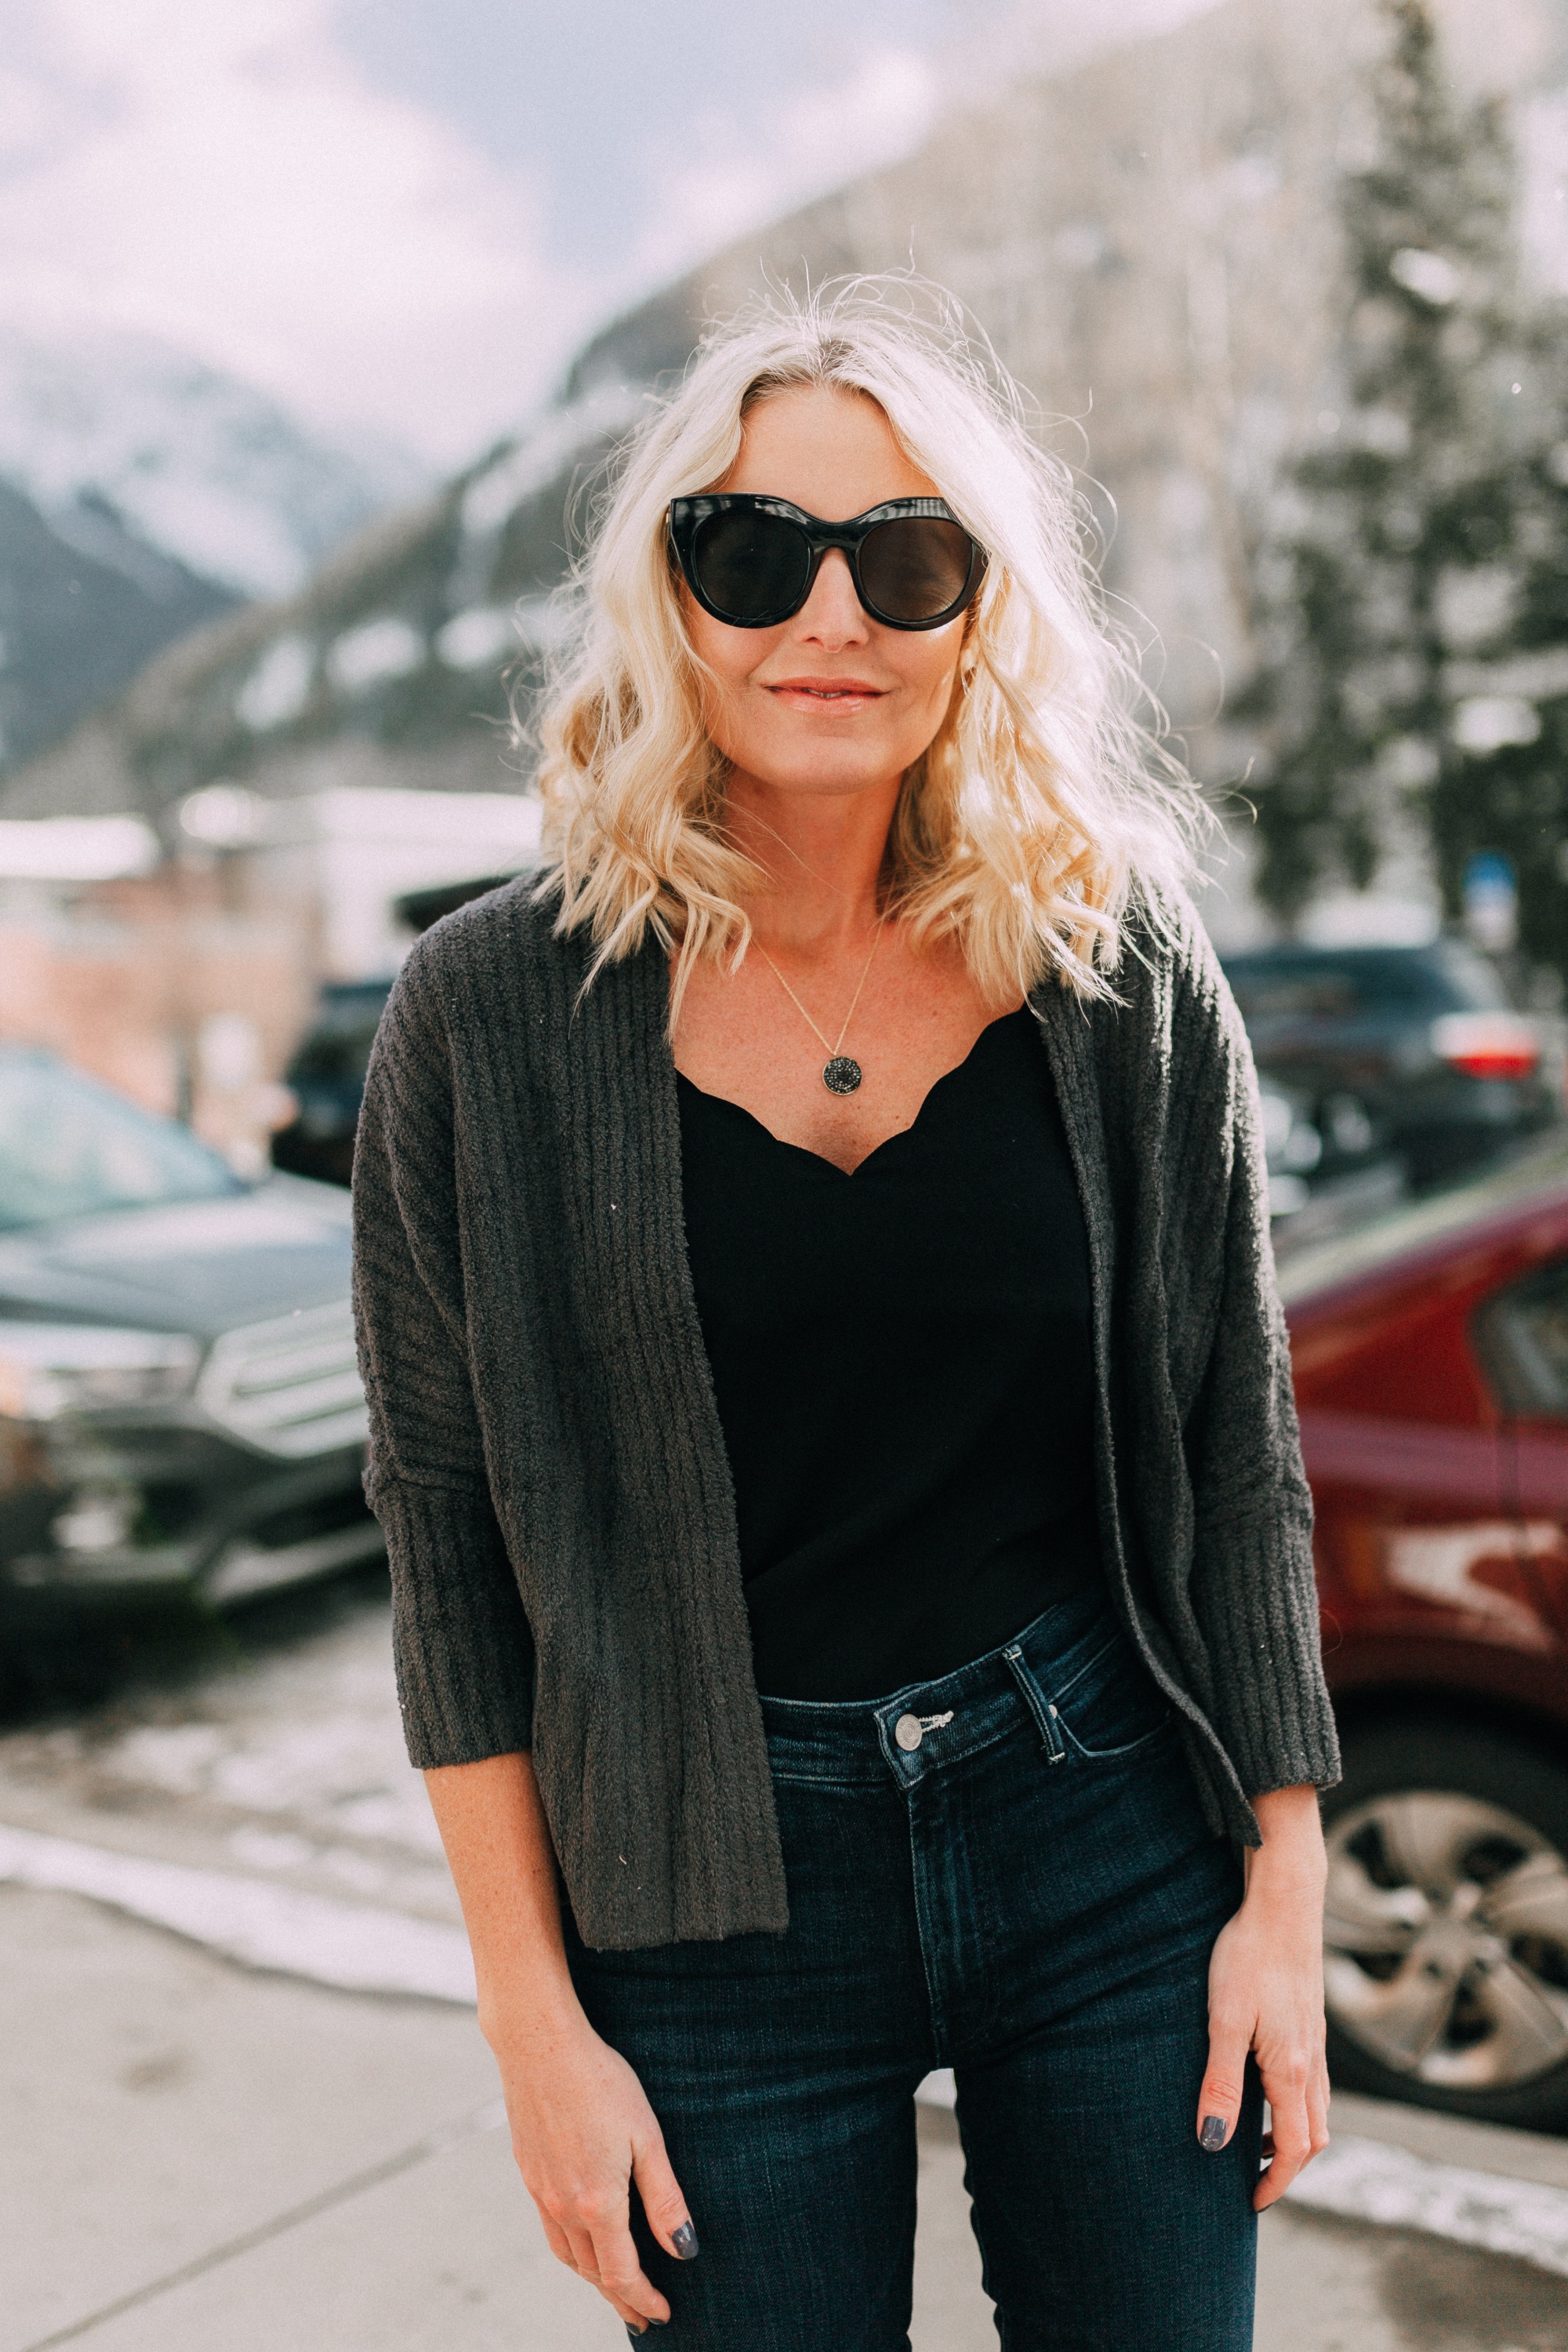 Styling Cardigan Sweater 2 Ways, one look for date night and one for everyday casual activities featuring a Barefoot Dreams shrug cardigan on fashion blogger over 40, Erin Busbee in partnership with QVC